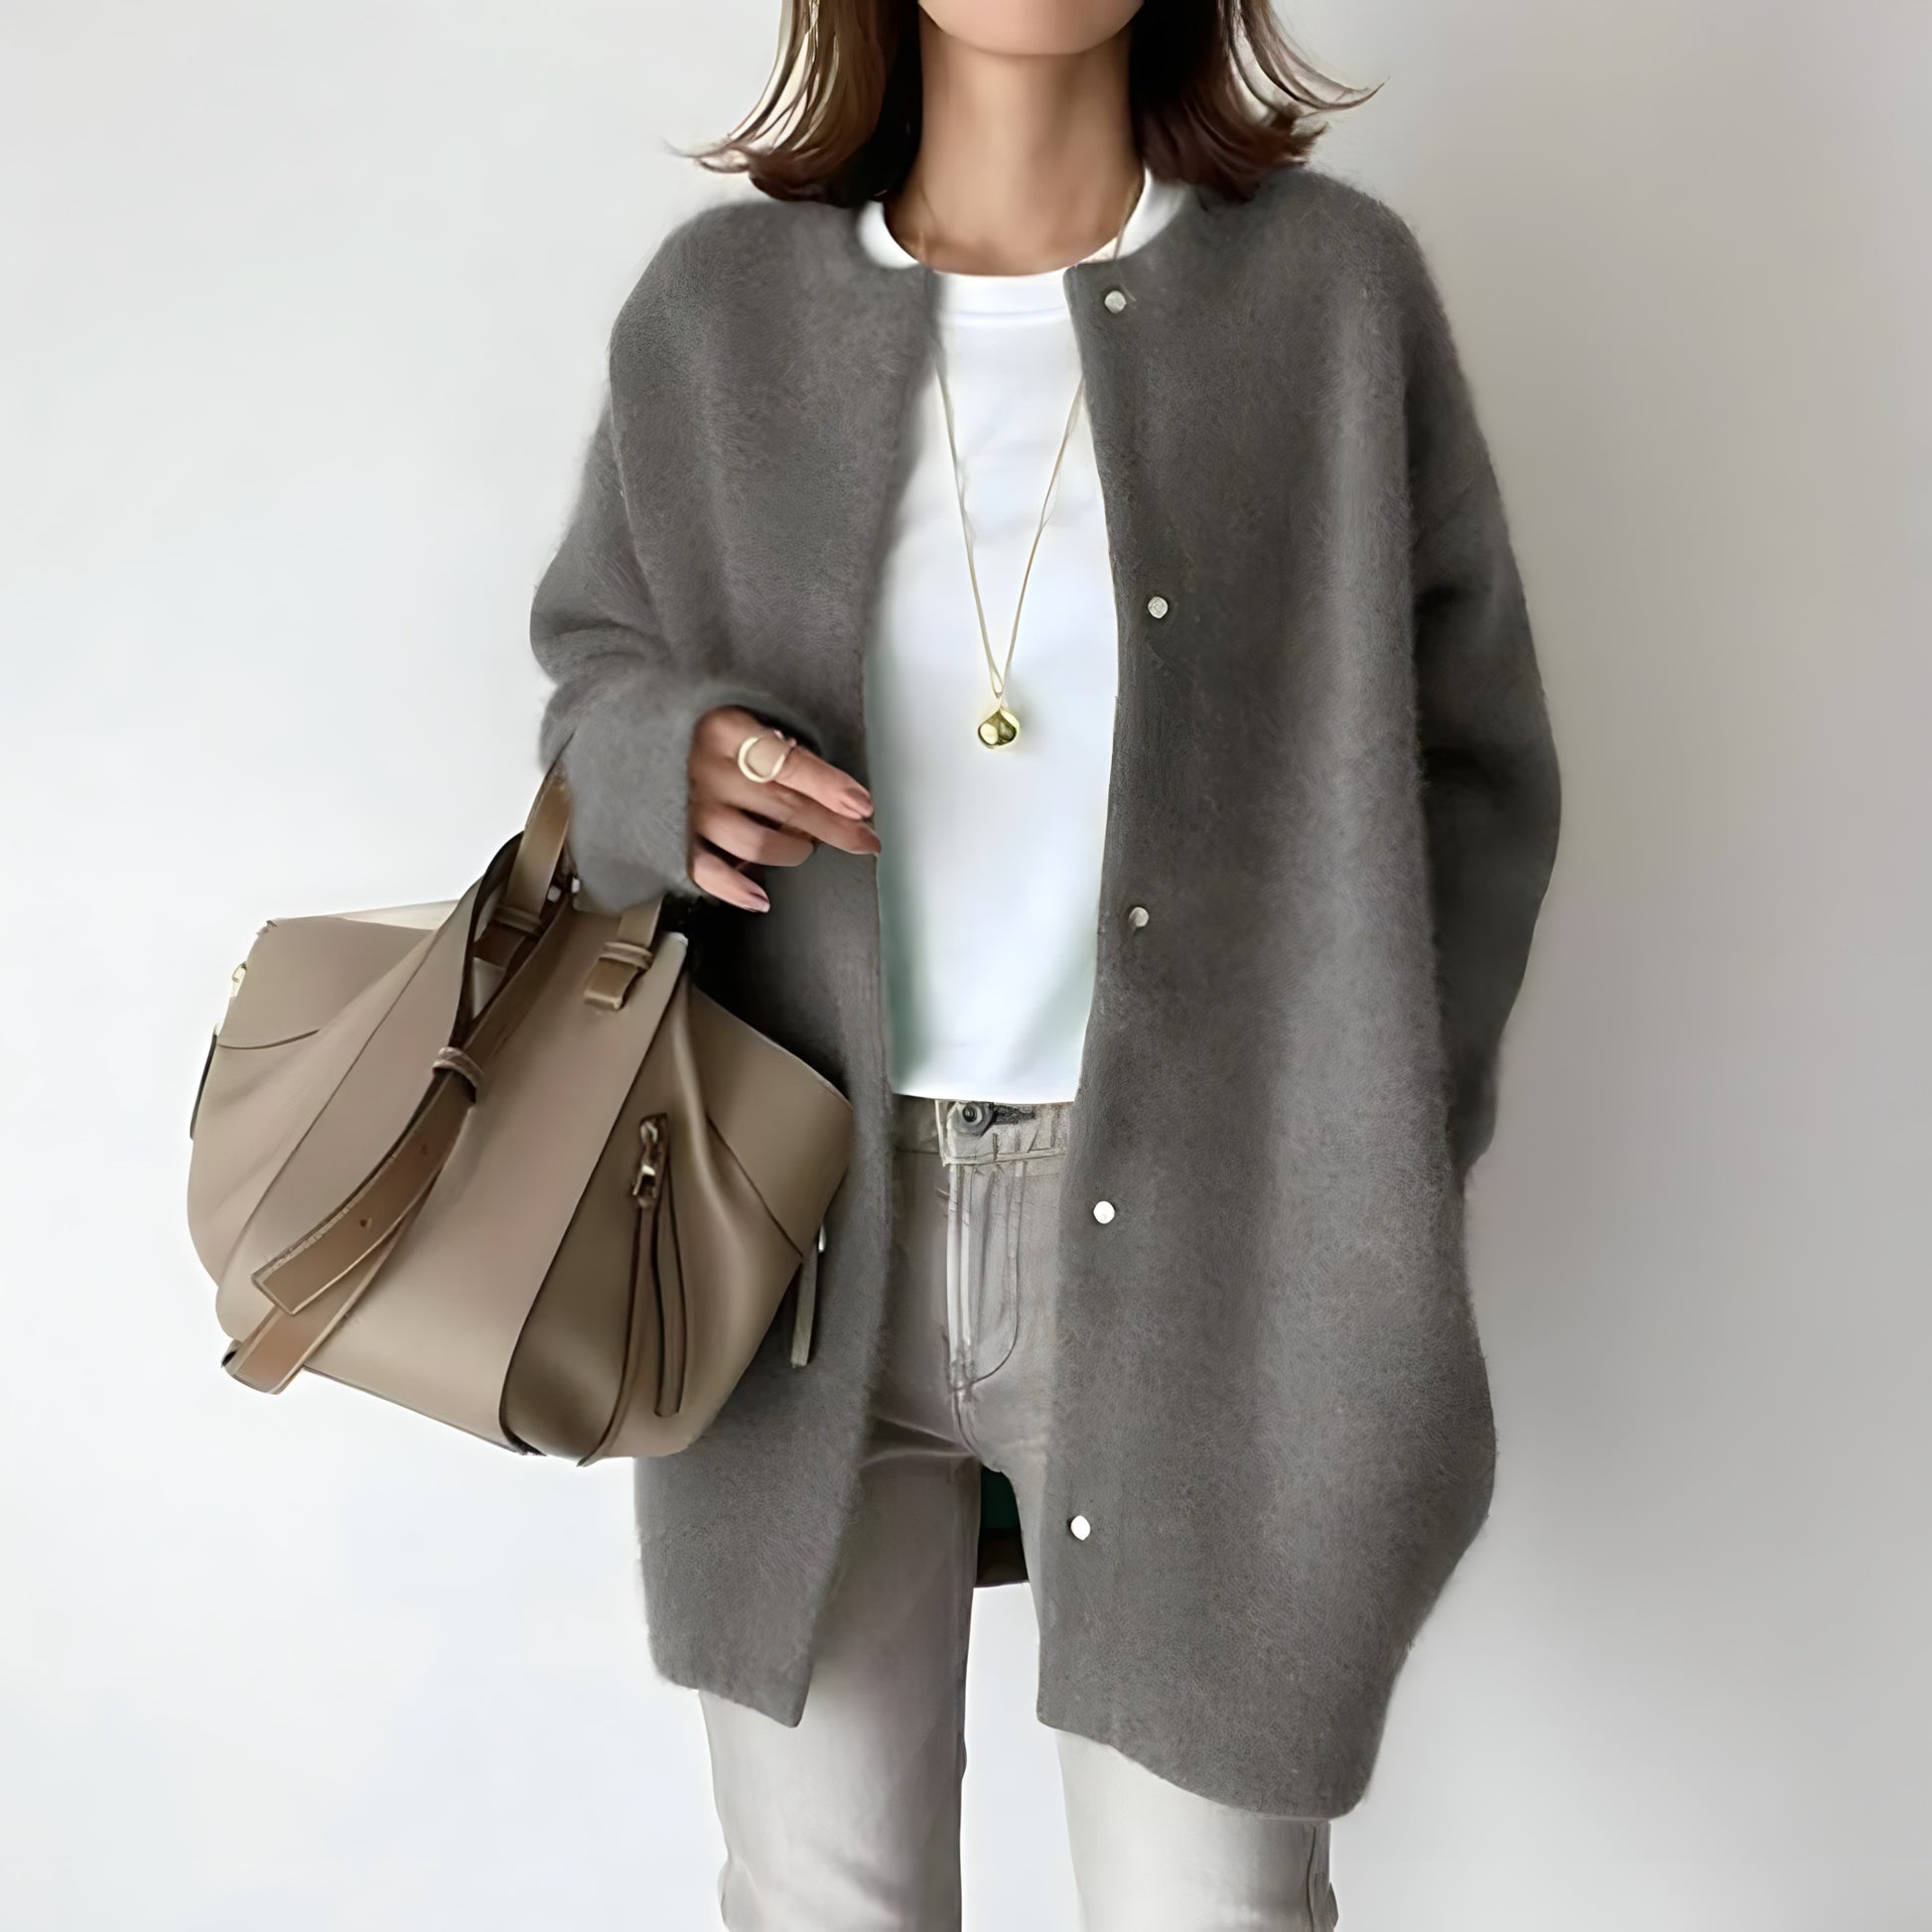 Whitney | Women's Cardigan with Buttons - Grey / XS - AMVIM